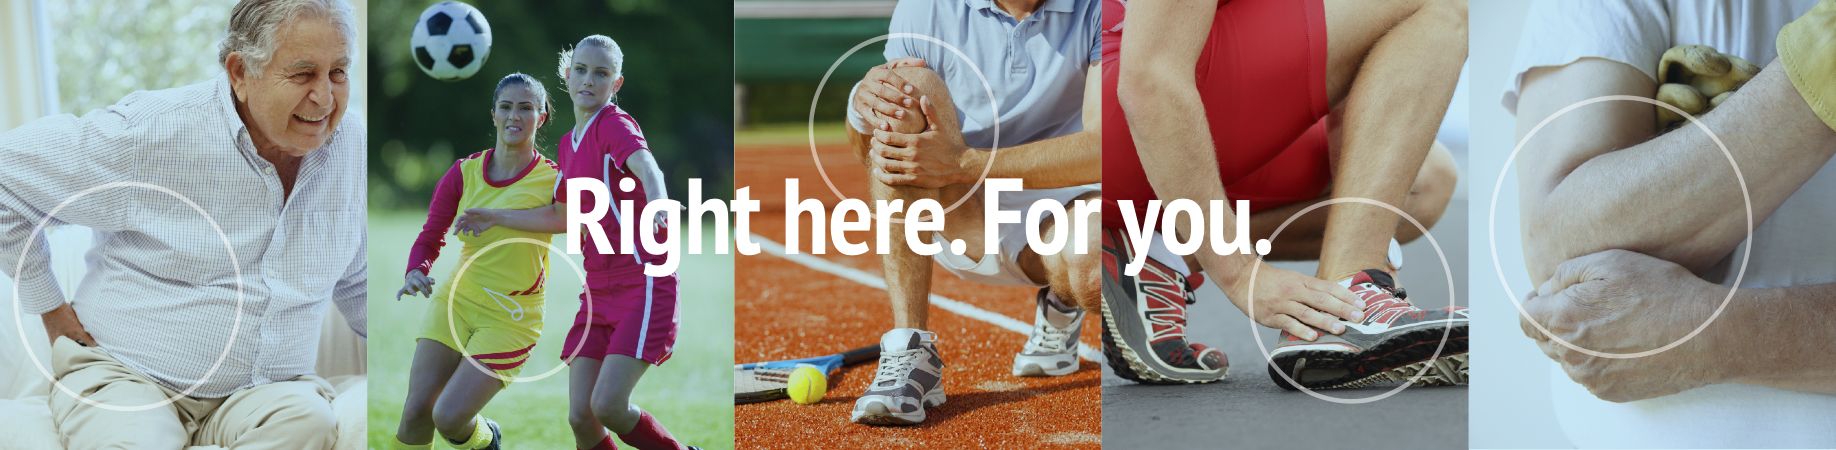 In need of orthopaedic care in the Muskegon & Grand Haven, MI area? Give us at Orthopaedic Associates of Muskegon a call to schedule an appointment today.